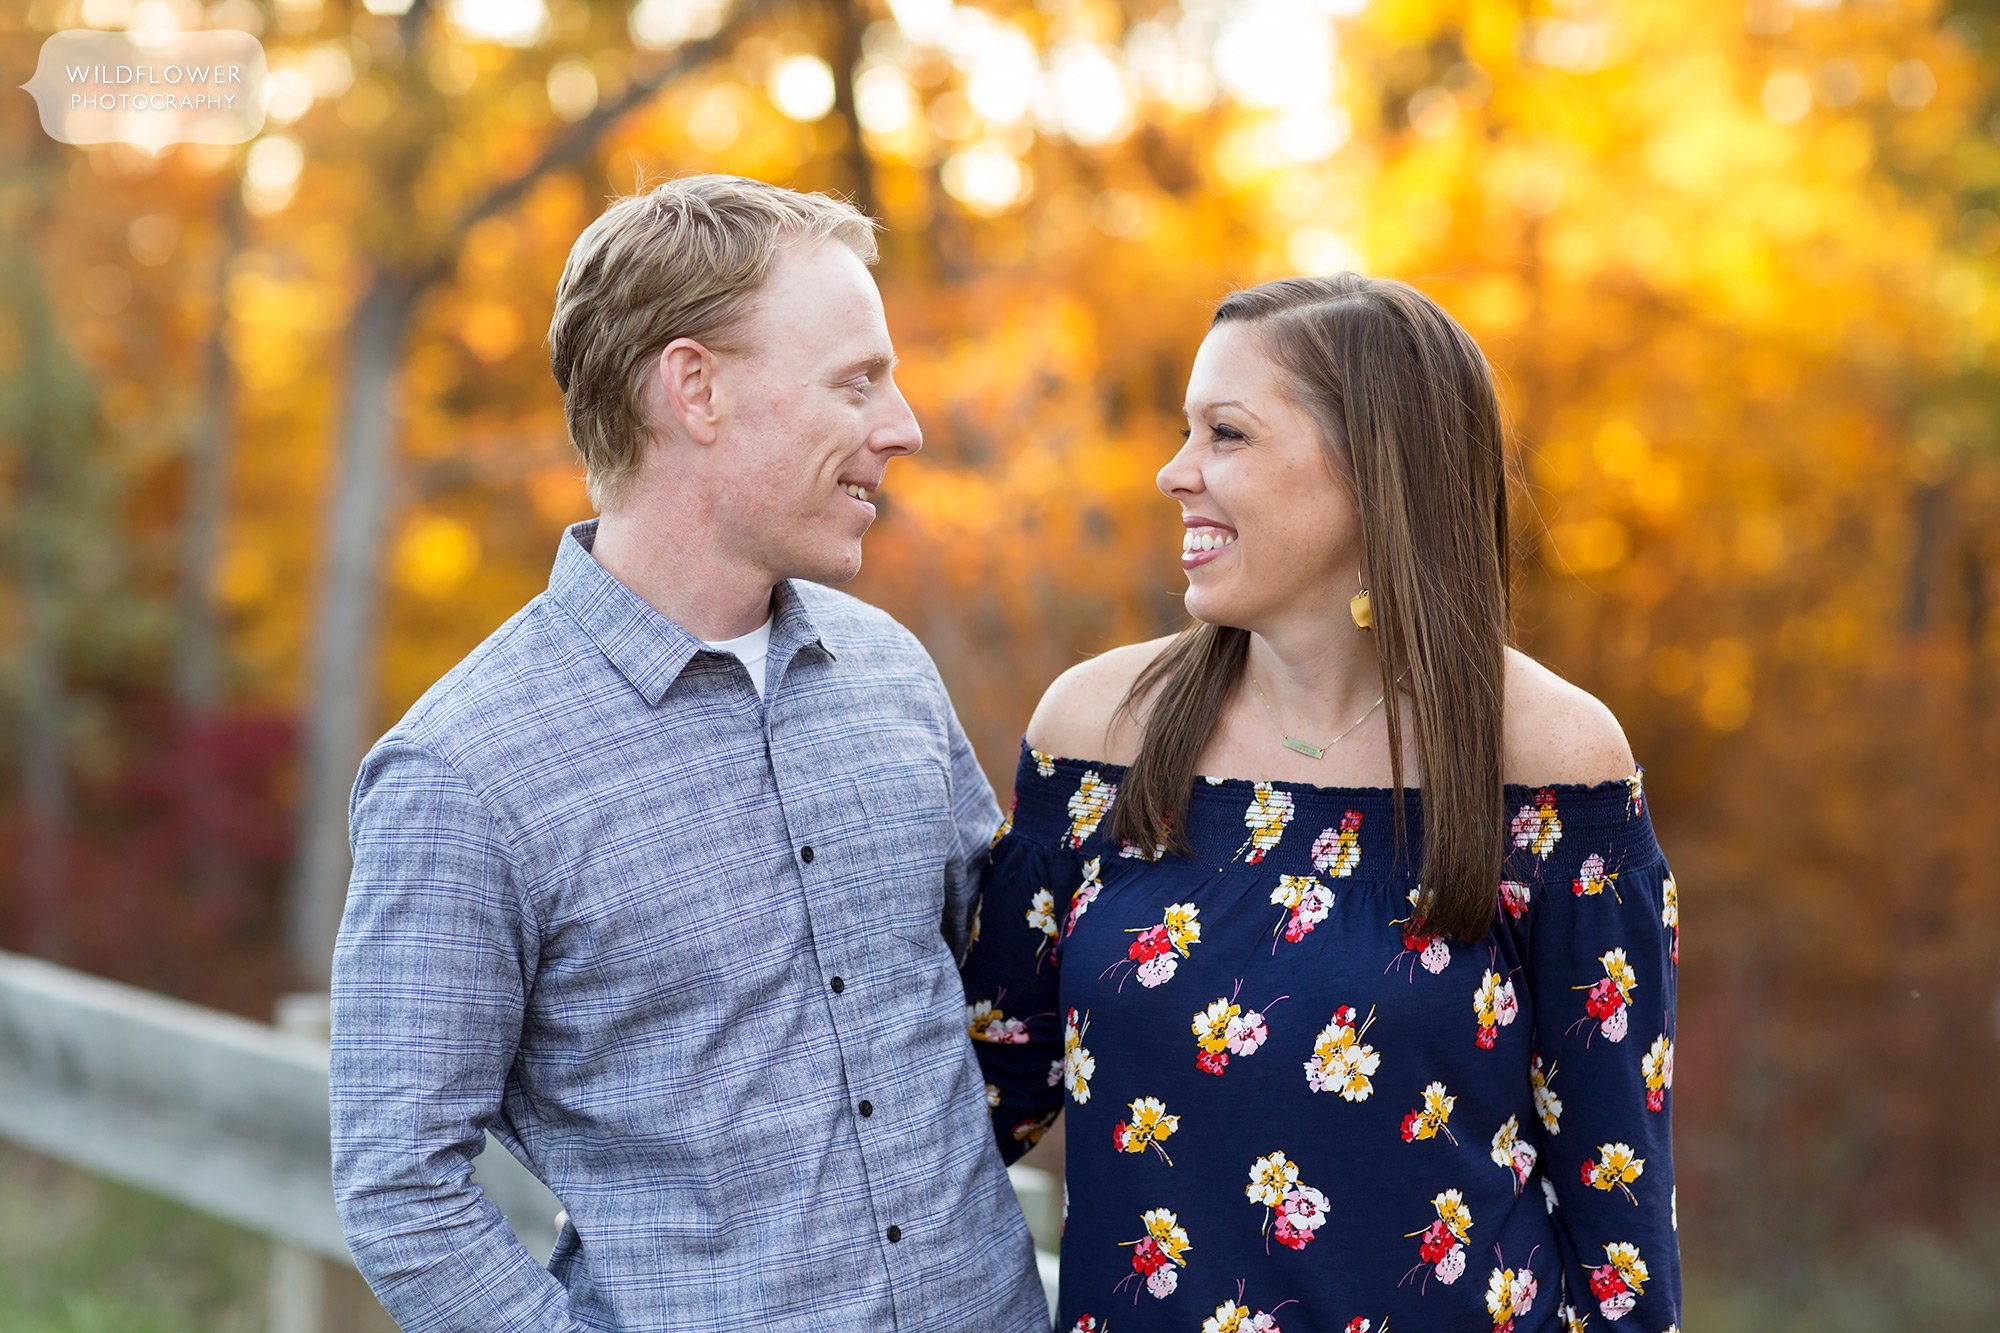 Parents smile at each other during this October family photography session in Columbia, MO.